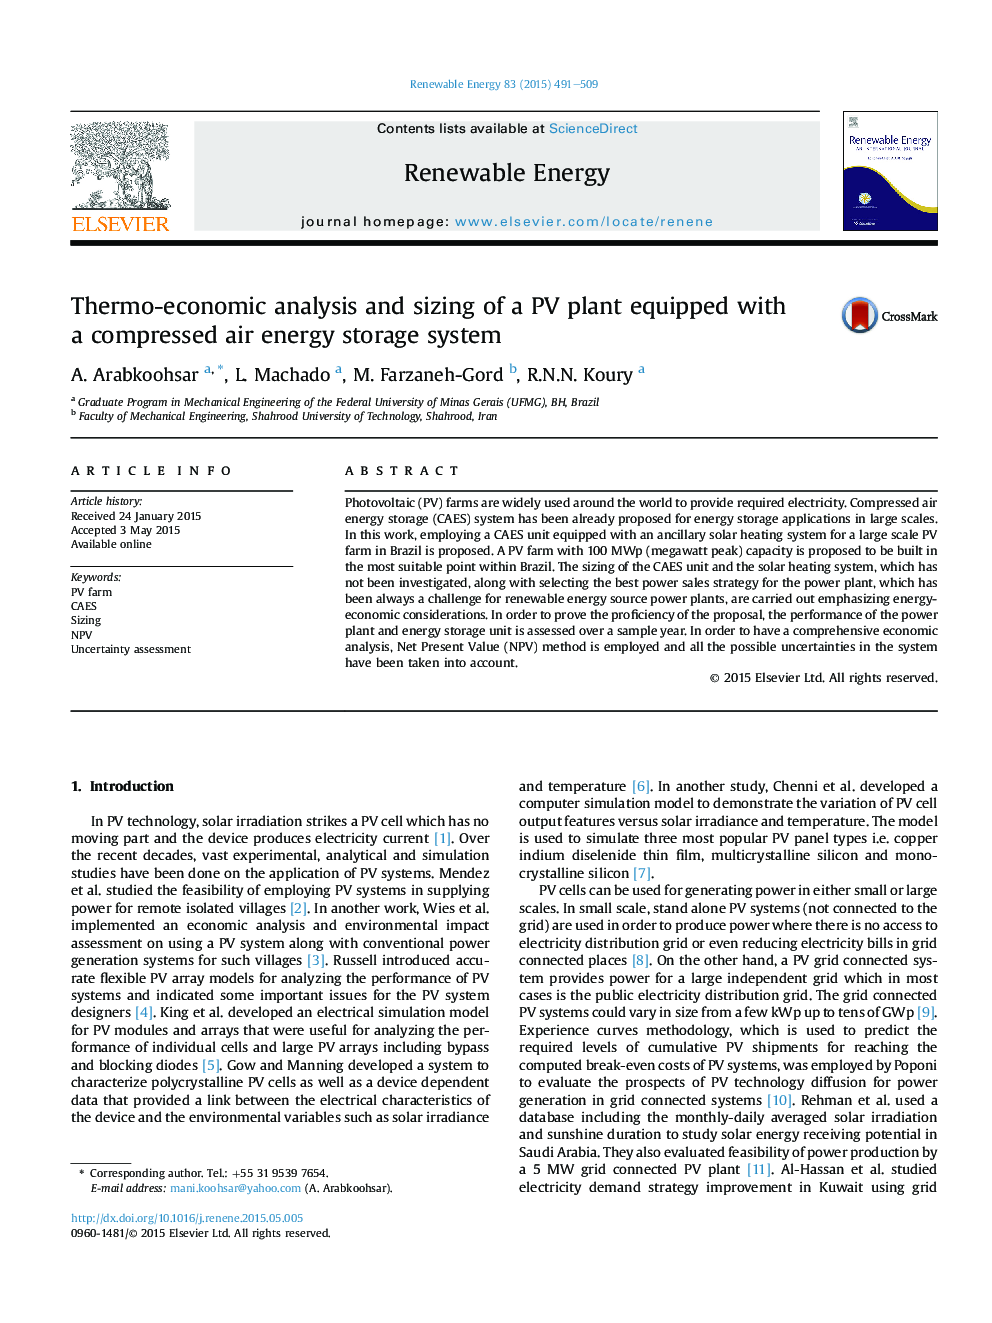 Thermo-economic analysis and sizing of a PV plant equipped with aÂ compressed air energy storage system